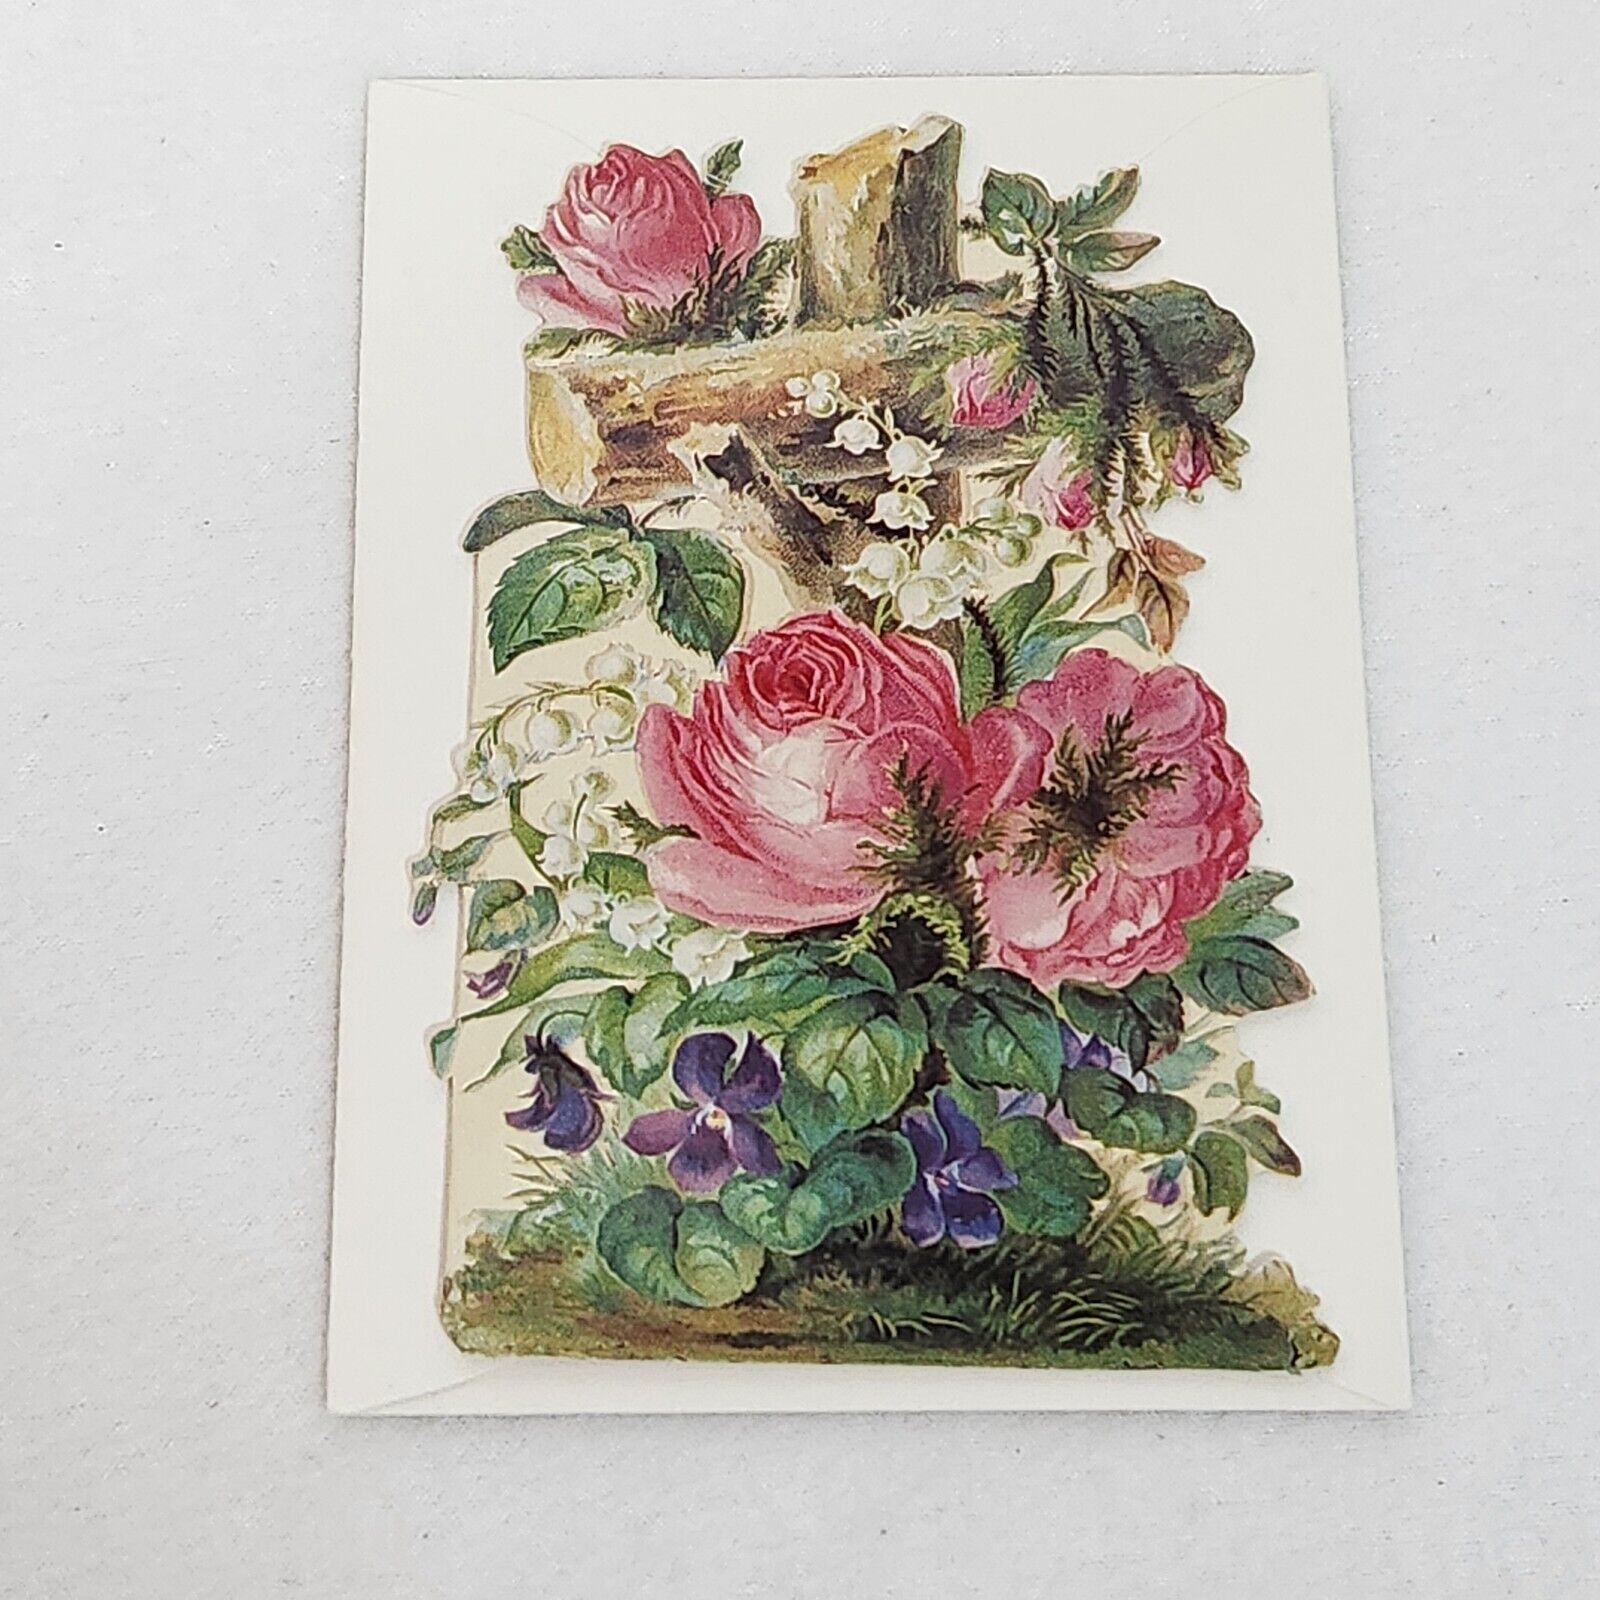 One 1991 Victorian Charms Wooden Cross & Flowers Sympathy Greeting Card+Env. USA